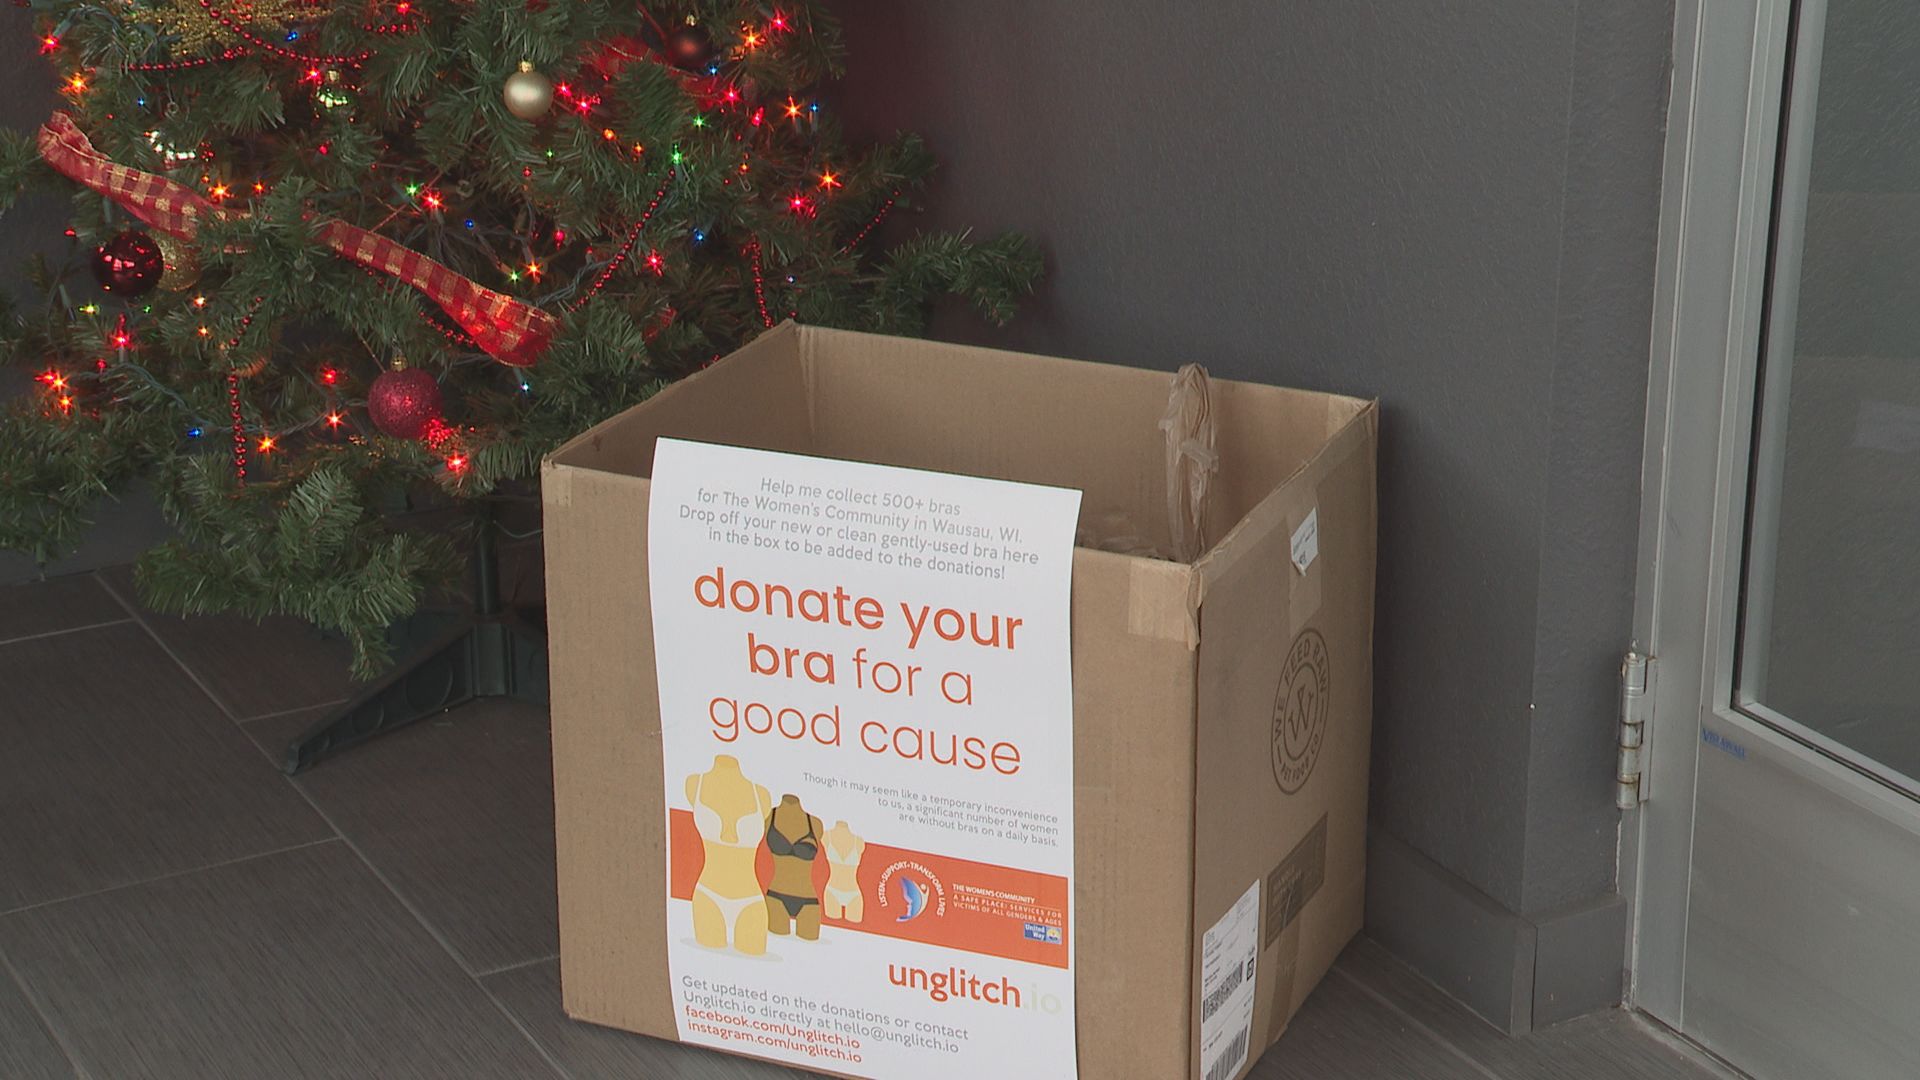 Local Salon encourages students to donate bras 